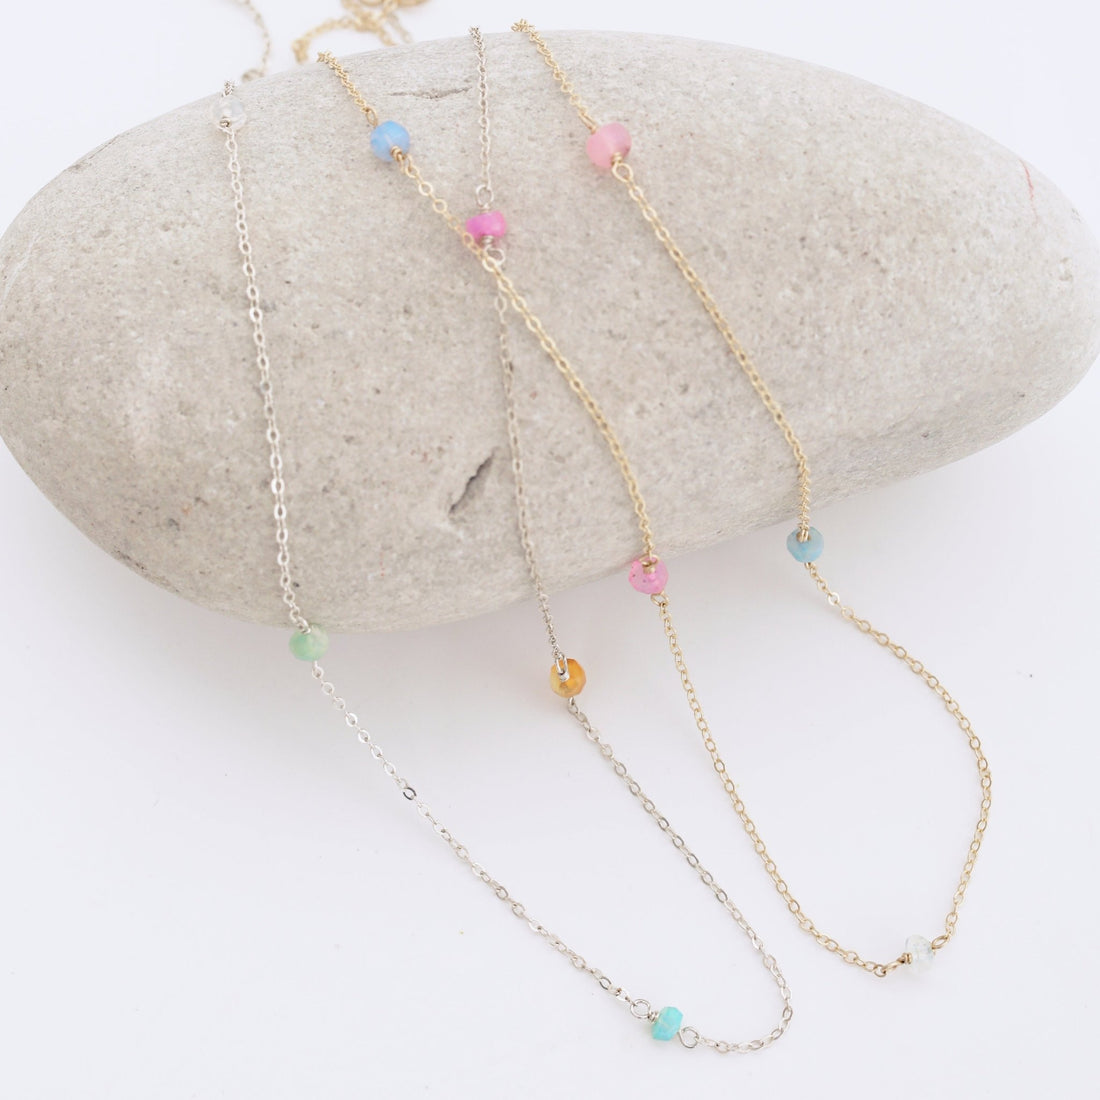 Rainbow Sprinkles Opal Necklace - Chocolate and Steel